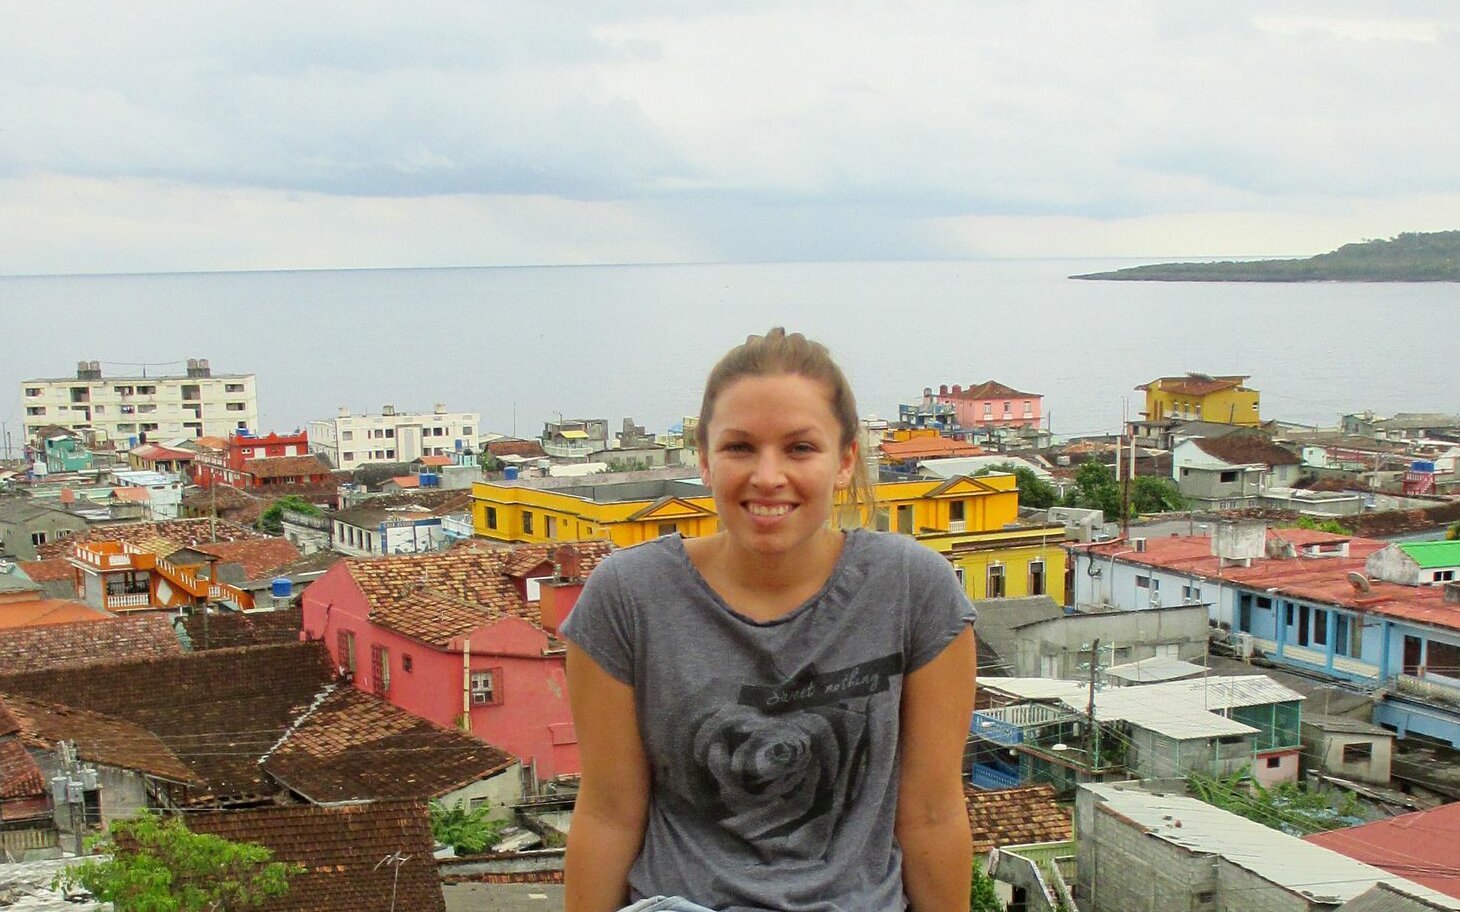 Ms Sandra Lichtblau with Cuban town and the sea in the background